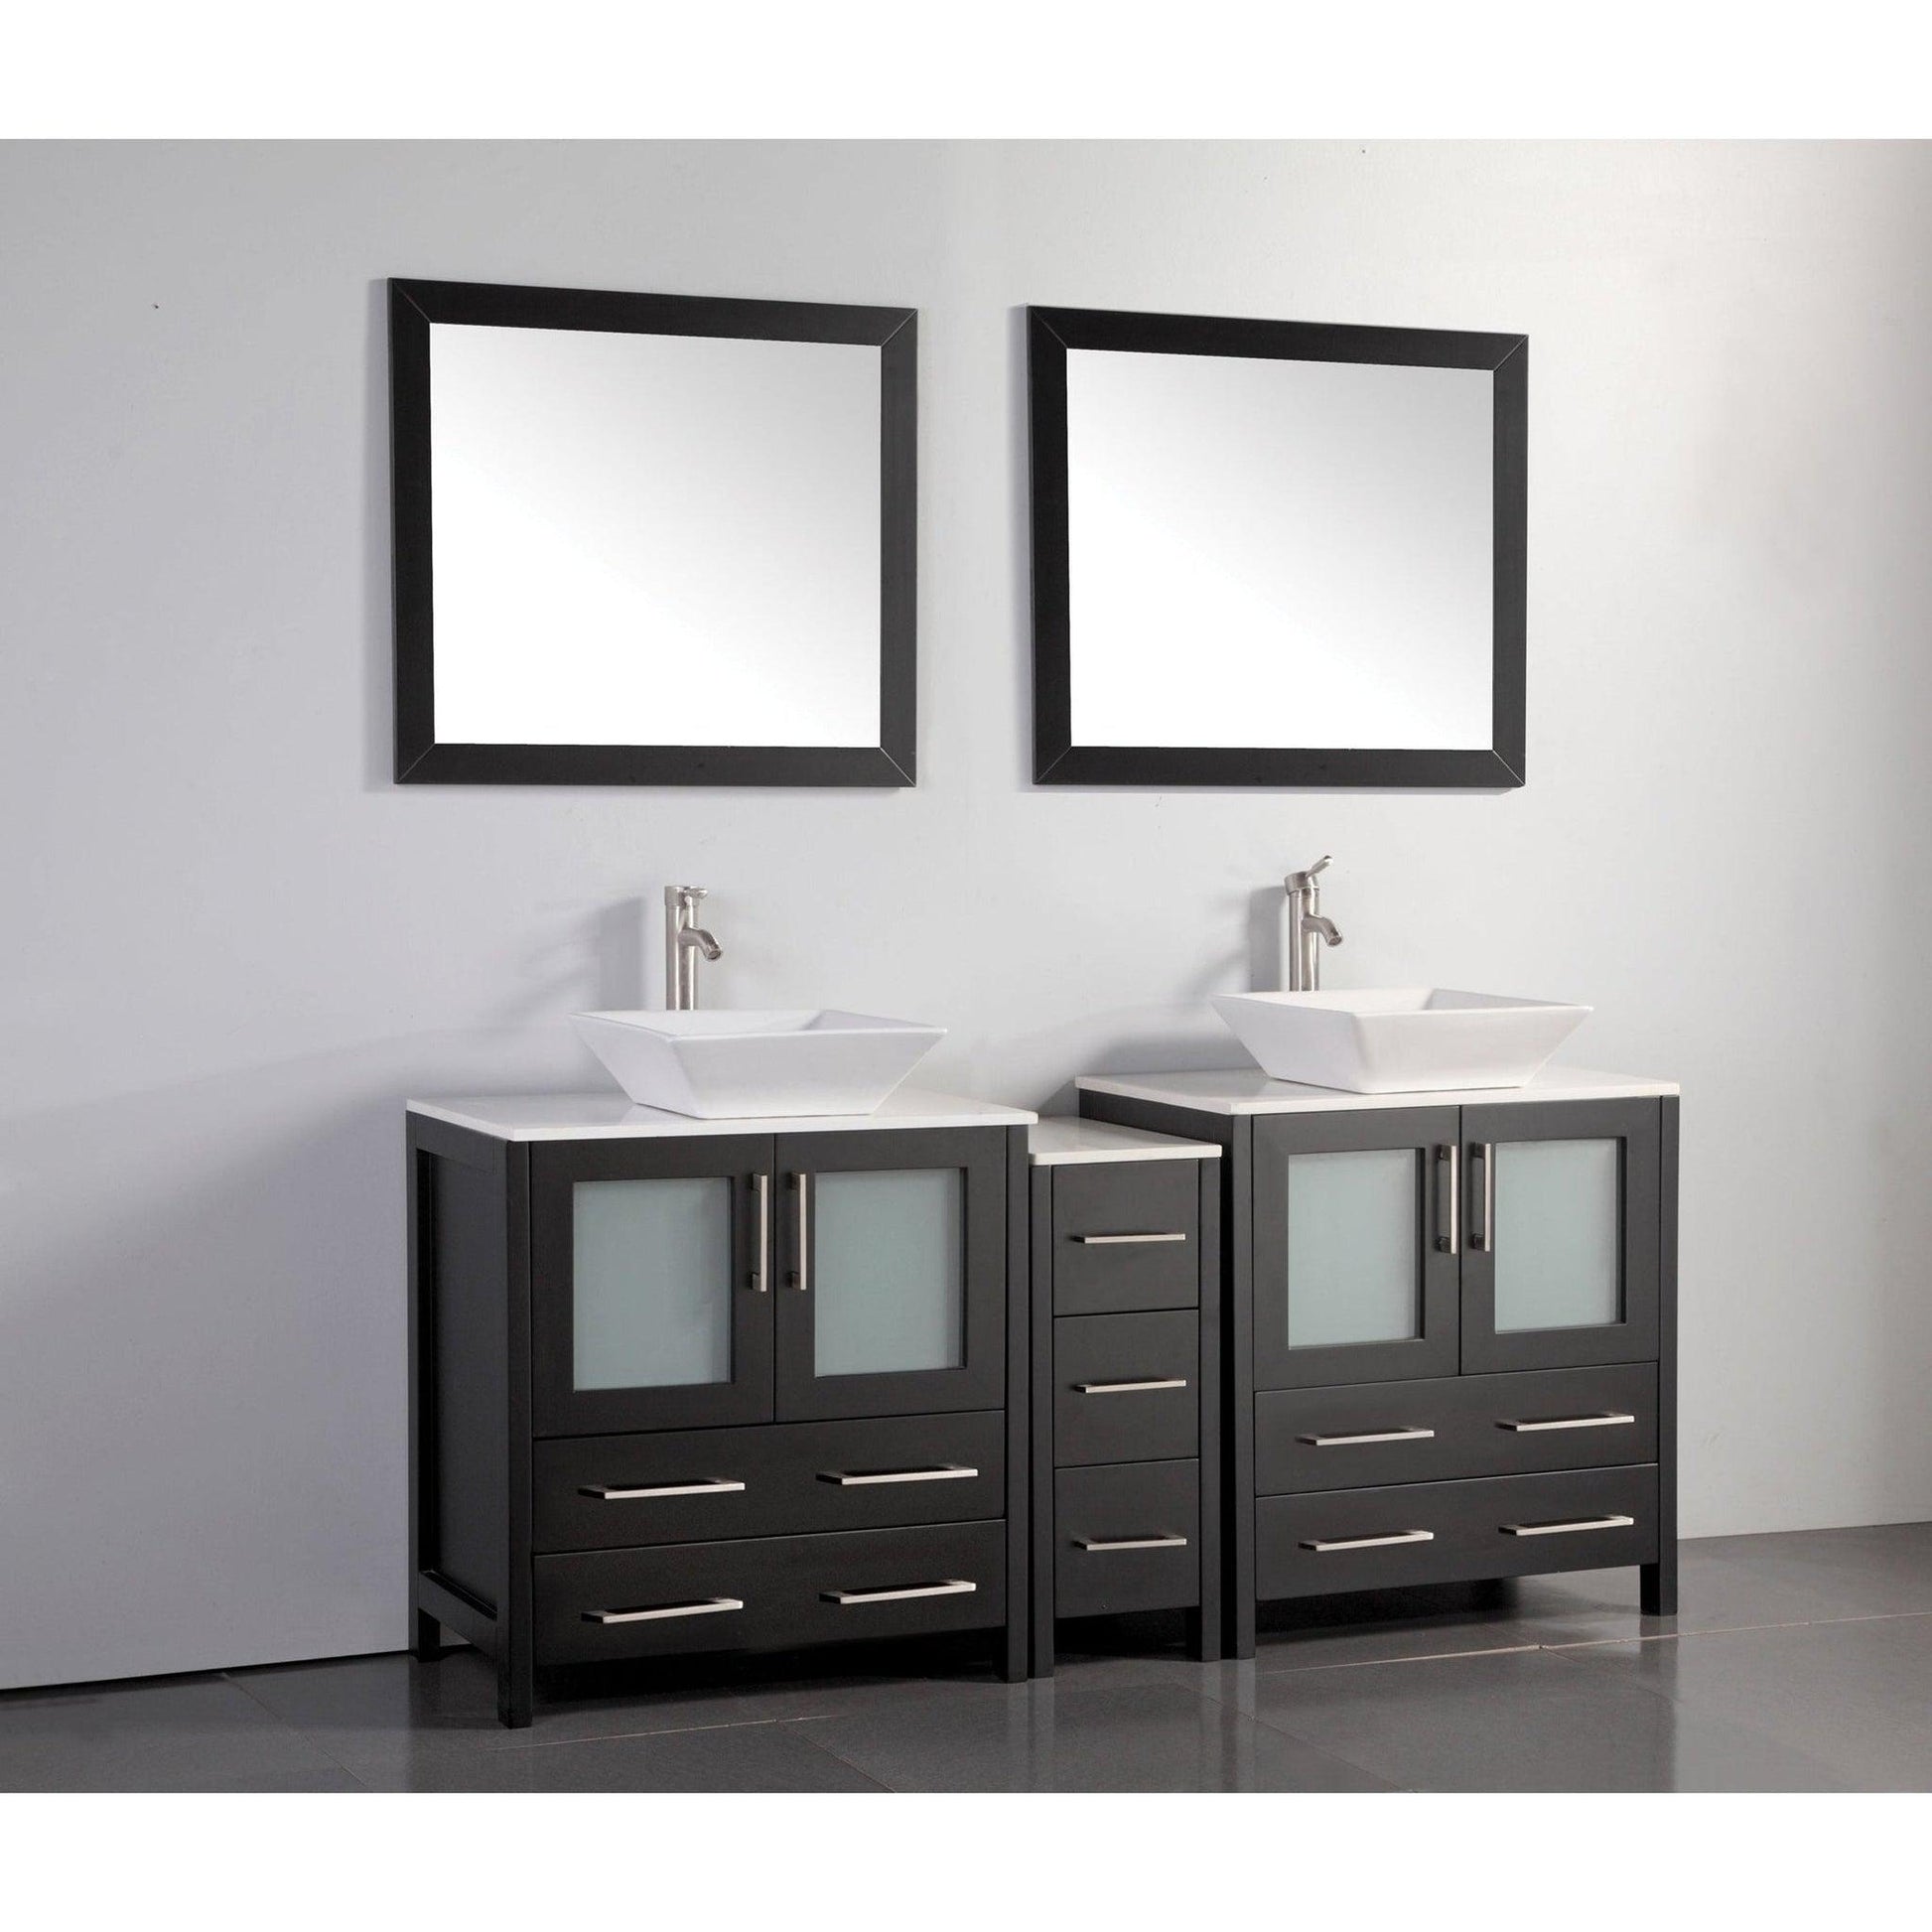 Vanity Art Ravenna 72" Double Espresso Freestanding Vanity Set With White Engineered Marble Top, Ceramic Vessel Sink, 1 Side Cabinet and 2 Mirrors